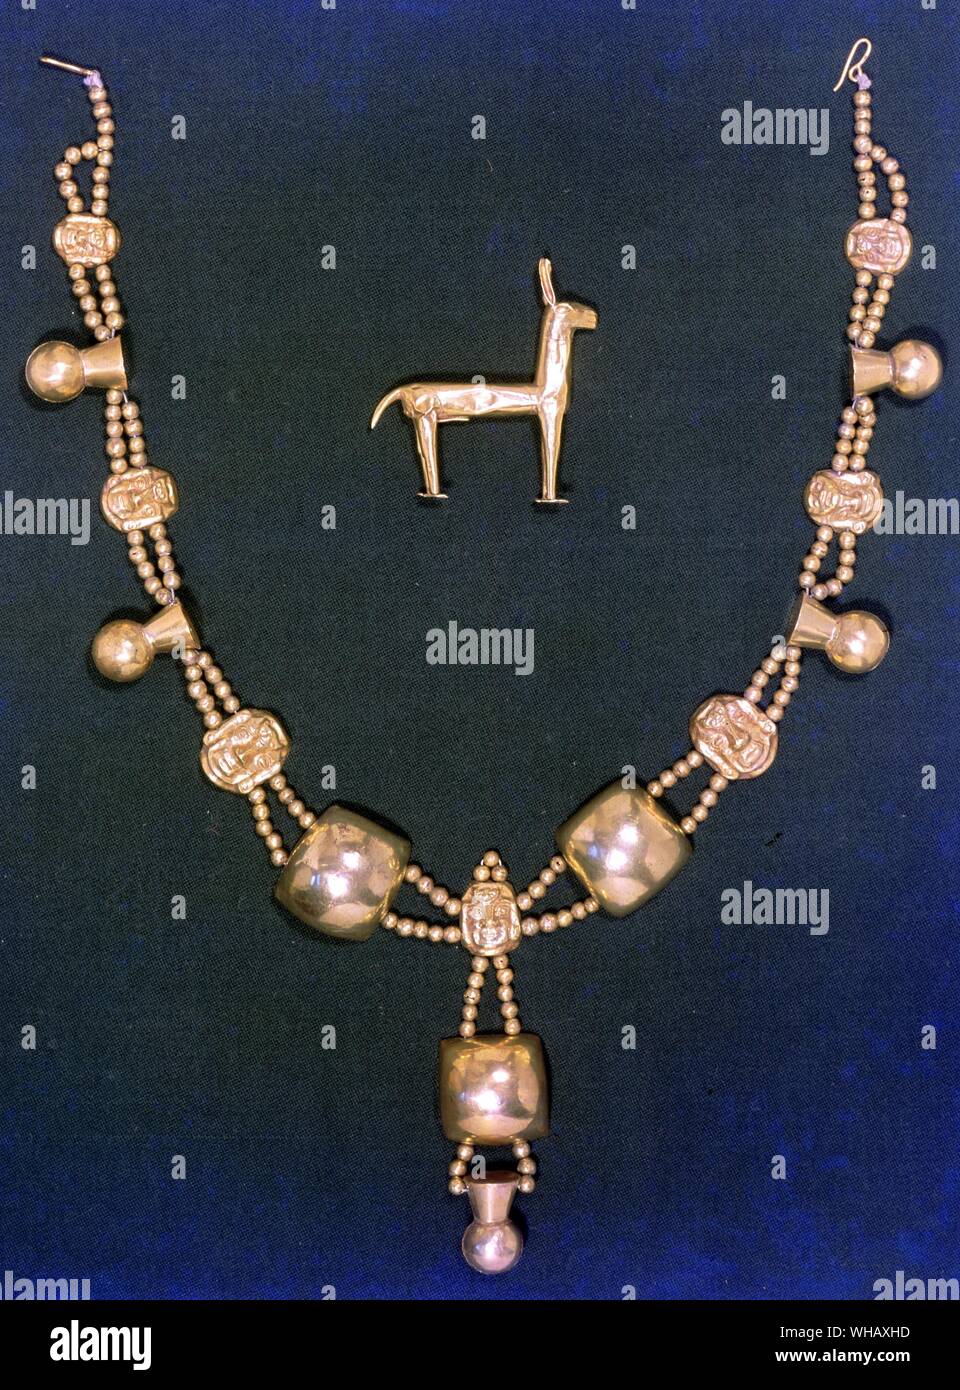 Inca Gold Necklace and Lama Chimu Culture. Stock Photo